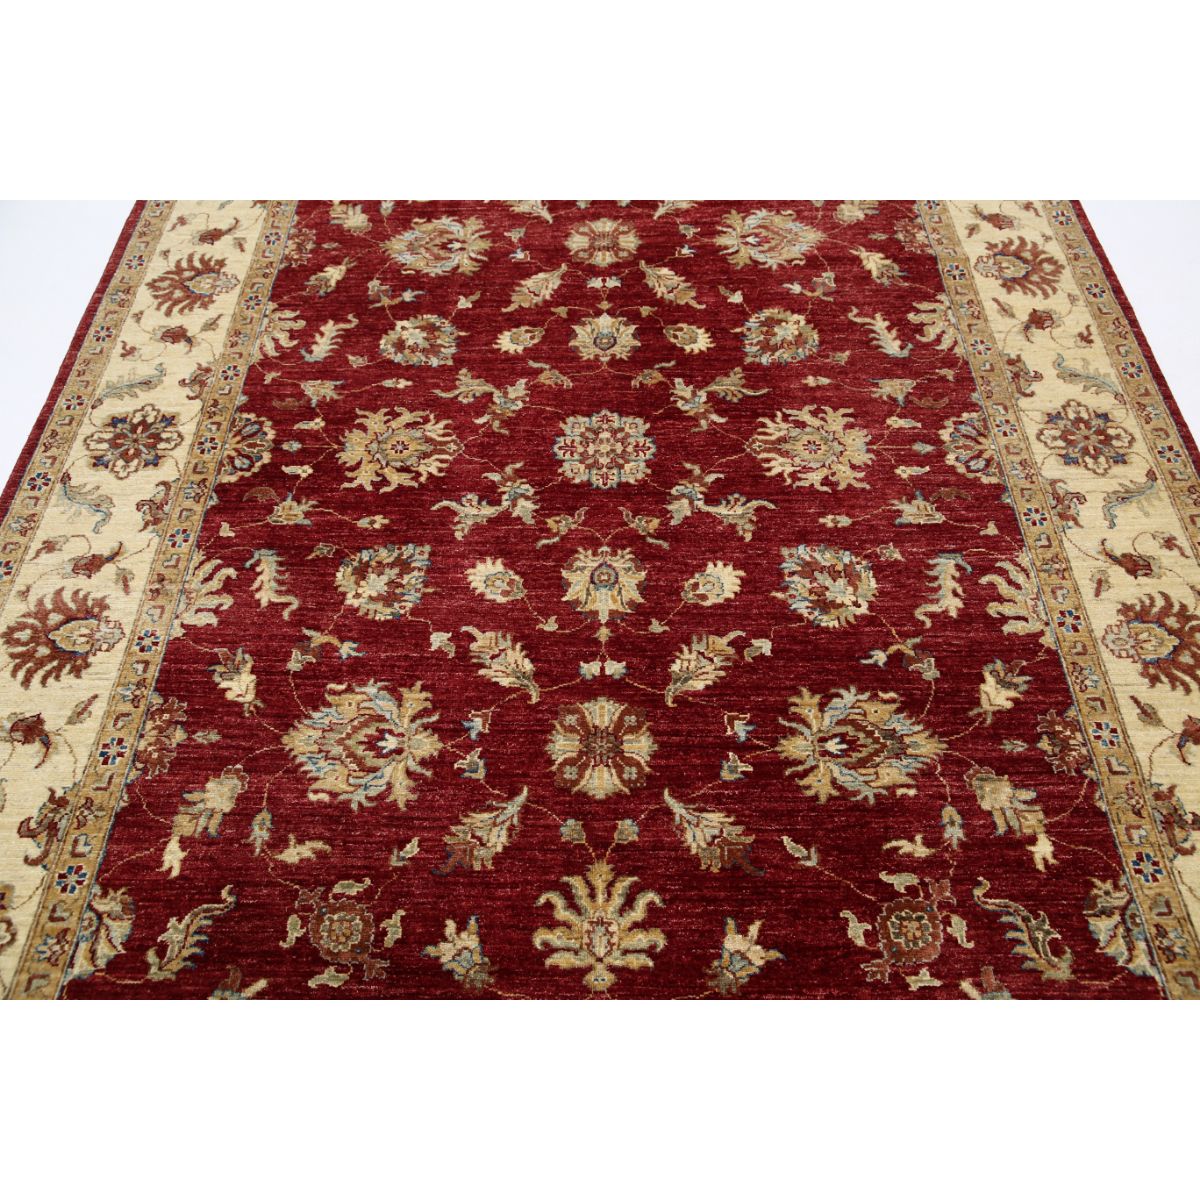 Ziegler 6'8" X 9'8" Wool Hand-Knotted Rug